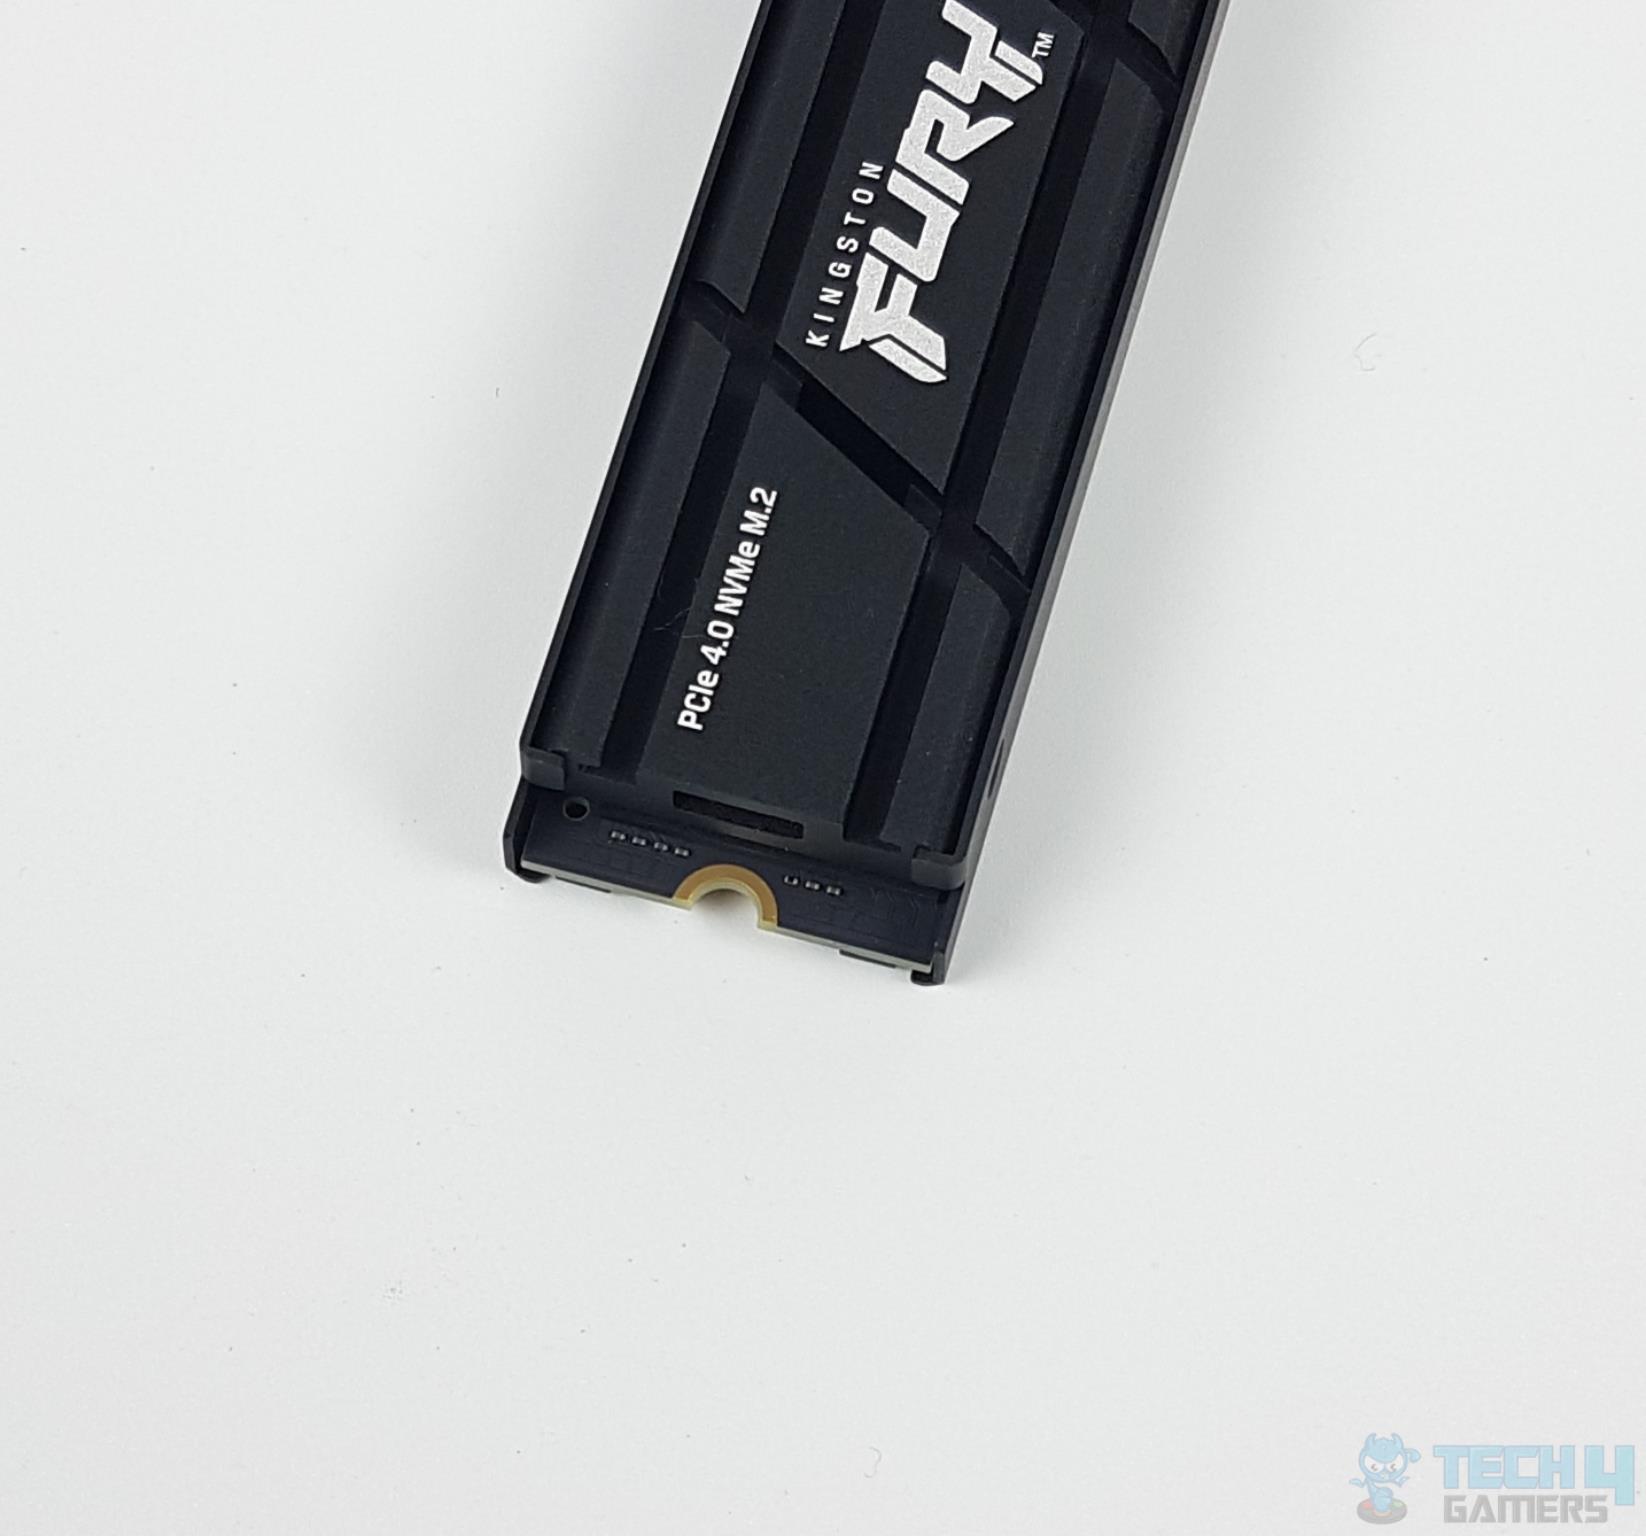 Kingston Fury Renegade 2TB NVMe SSD — The cutout side of the SSD